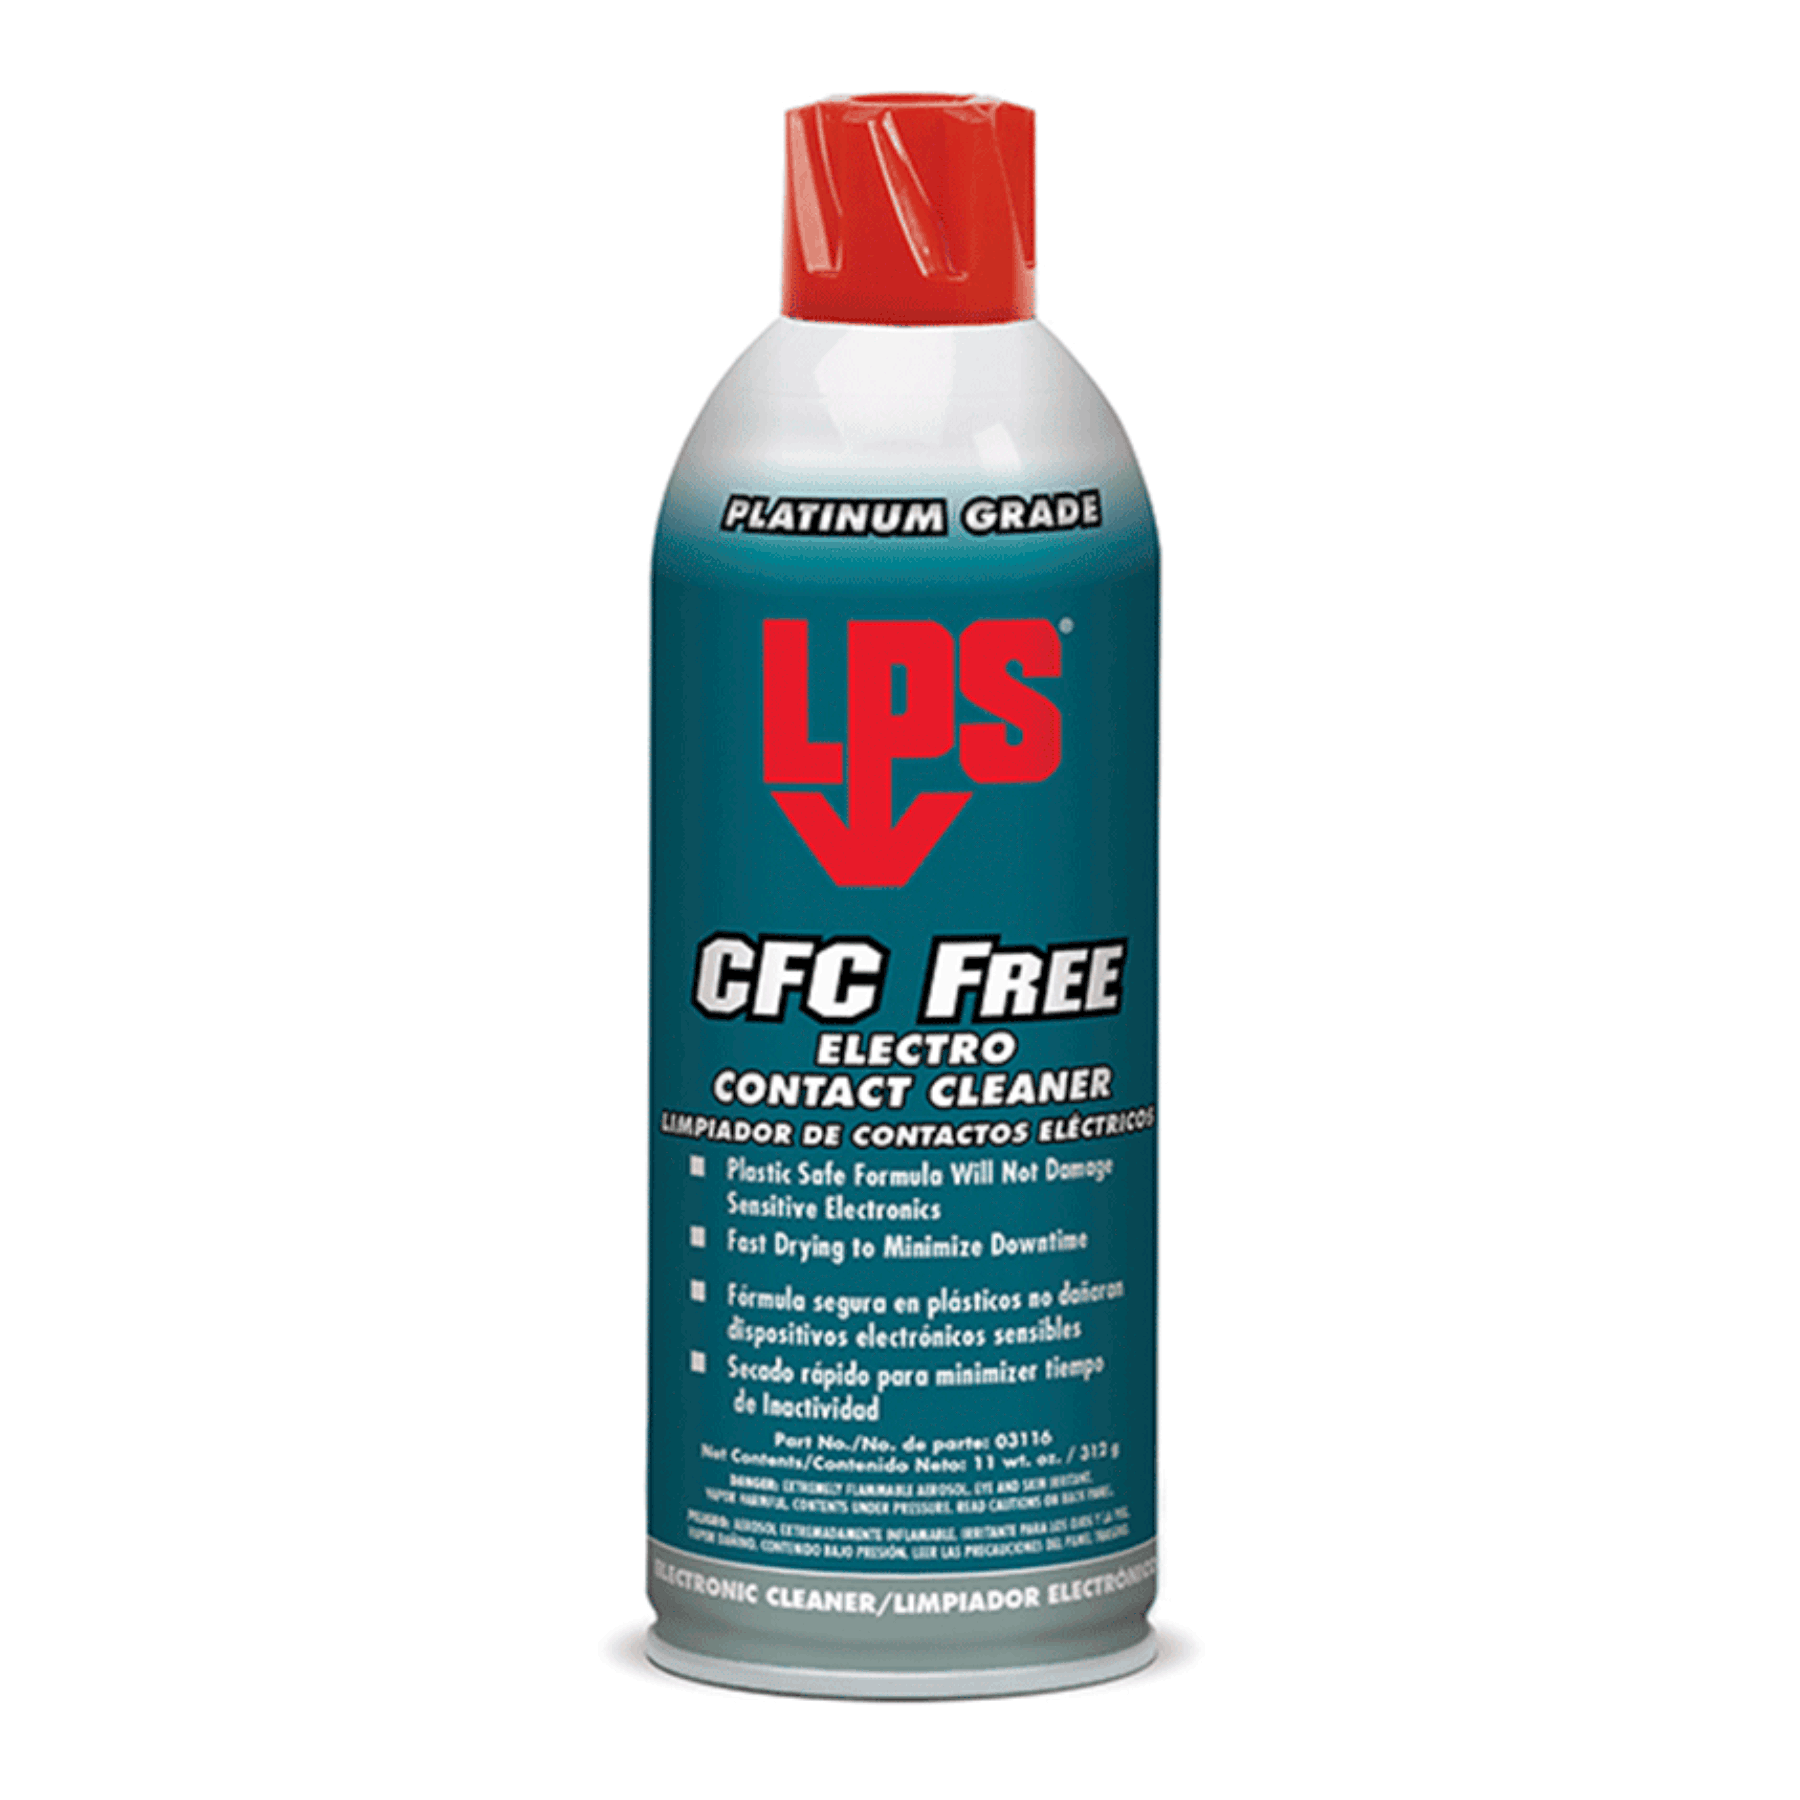 LPS CFC FREE ELECTRO CONTACT CLEANER | LIMPIA CONTACTOS 03116